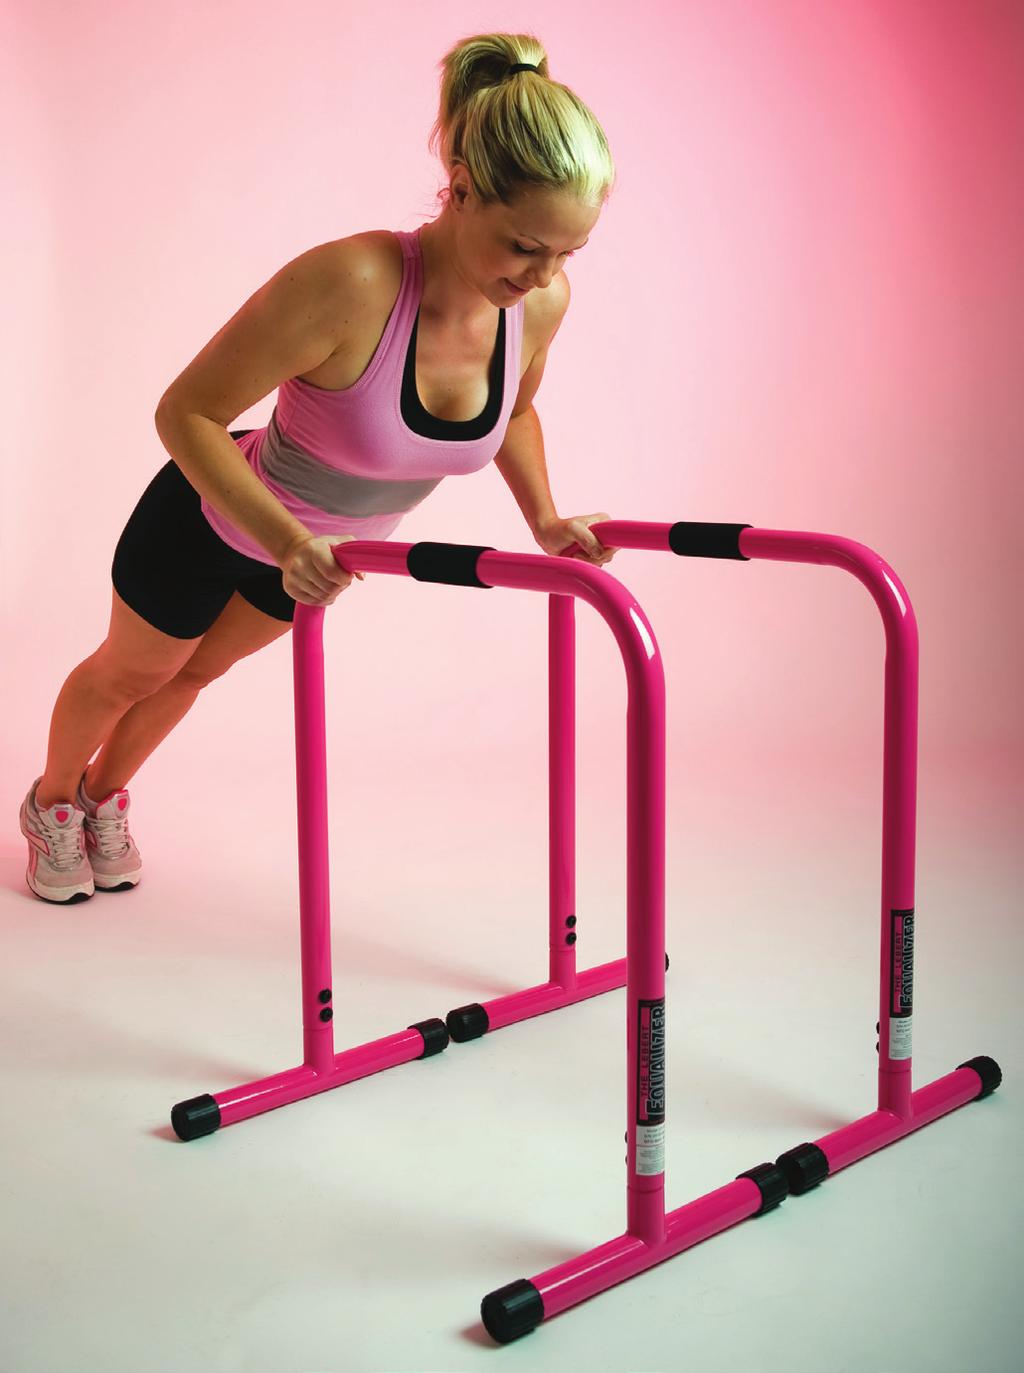 EQUALIZER Training Program The Equalizer (EQ) is a versatile portable device for challenging bodyweight compound-strength moves, allowing many progressions and regressions for each exercise. No.